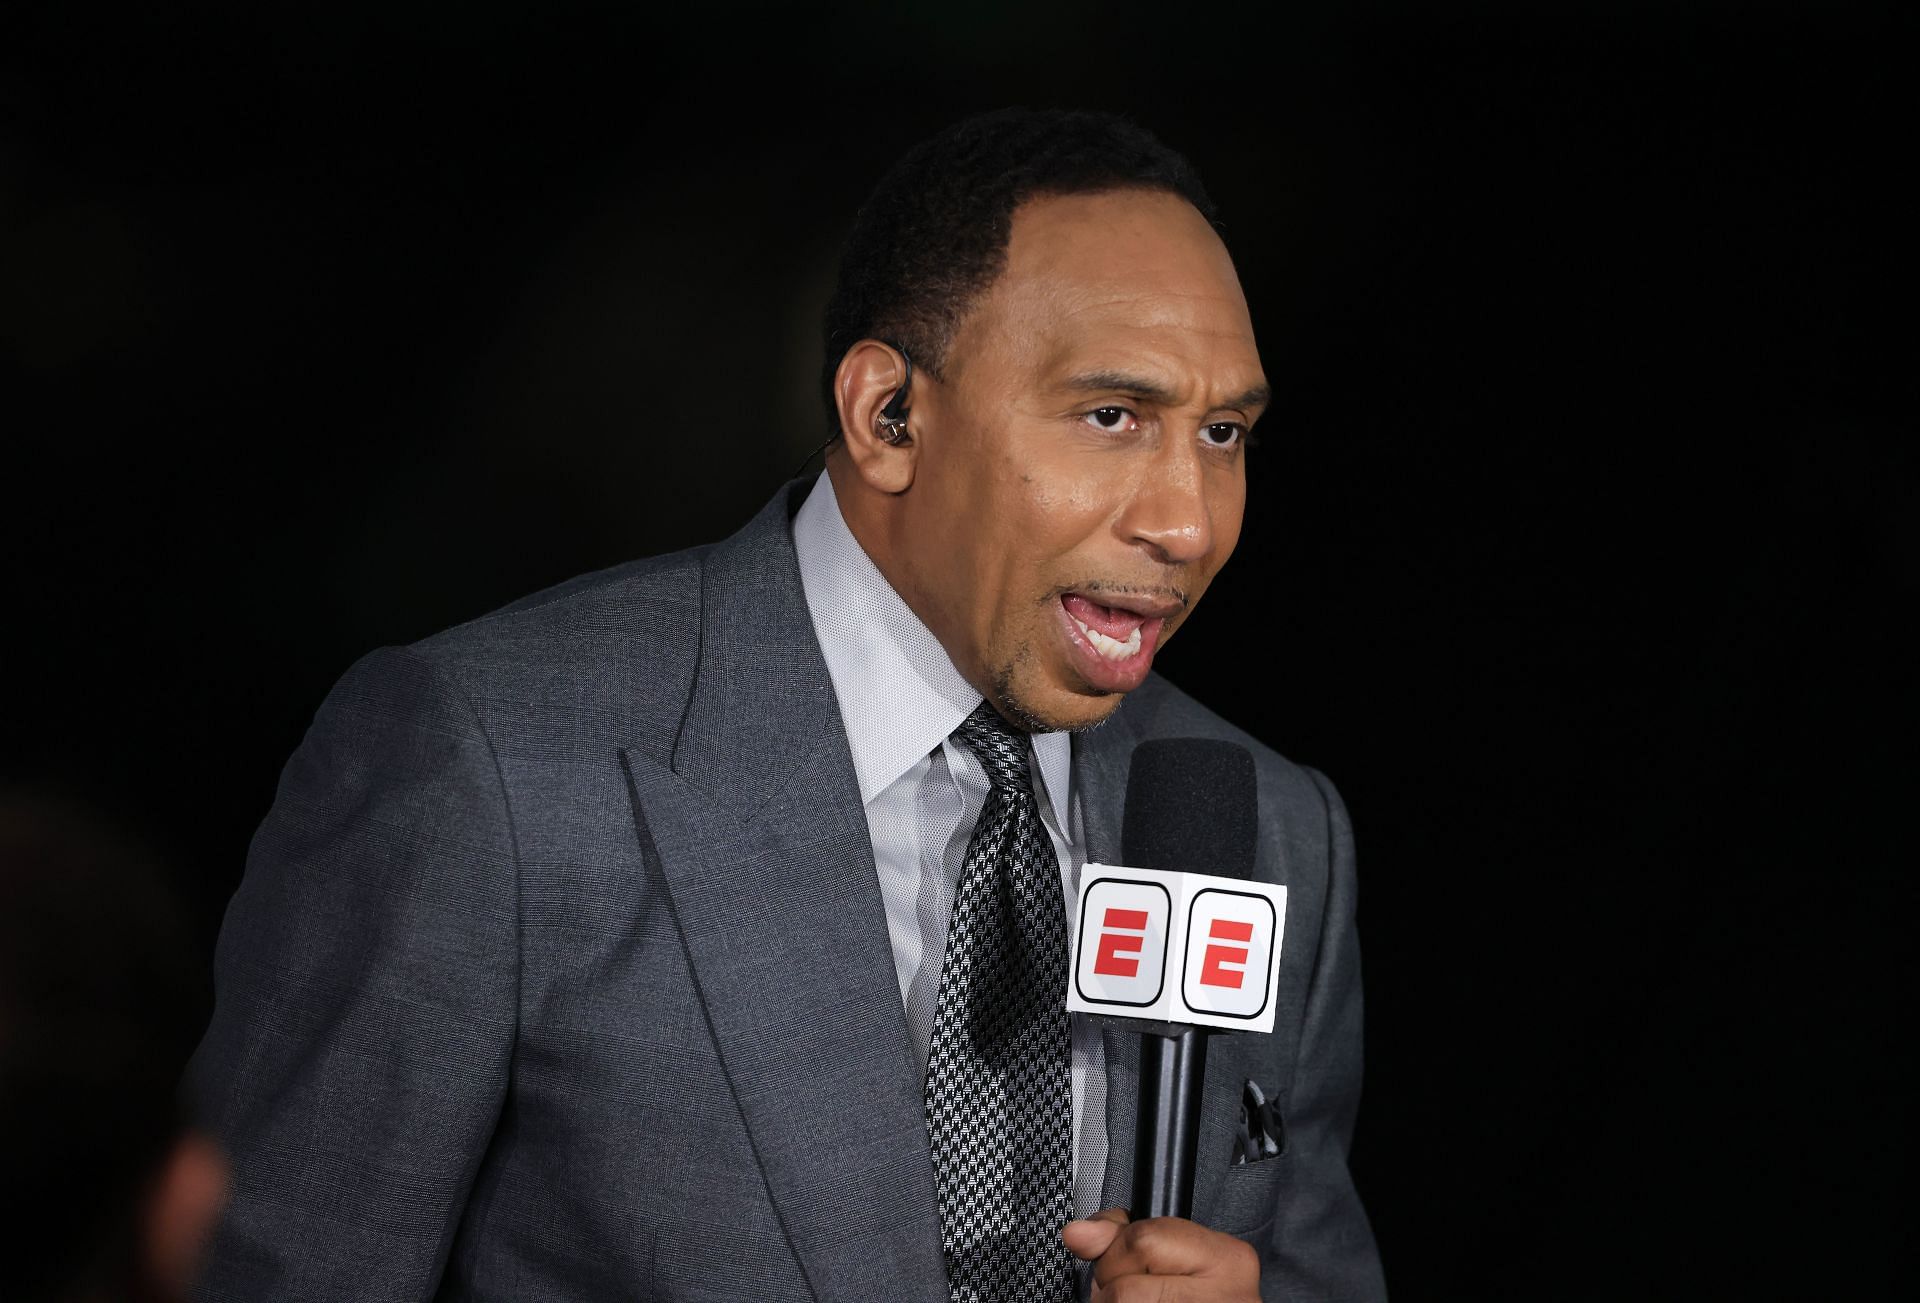 Stephen A Smith clapped back at Kyrie Irving over recent criticism on Twitter.